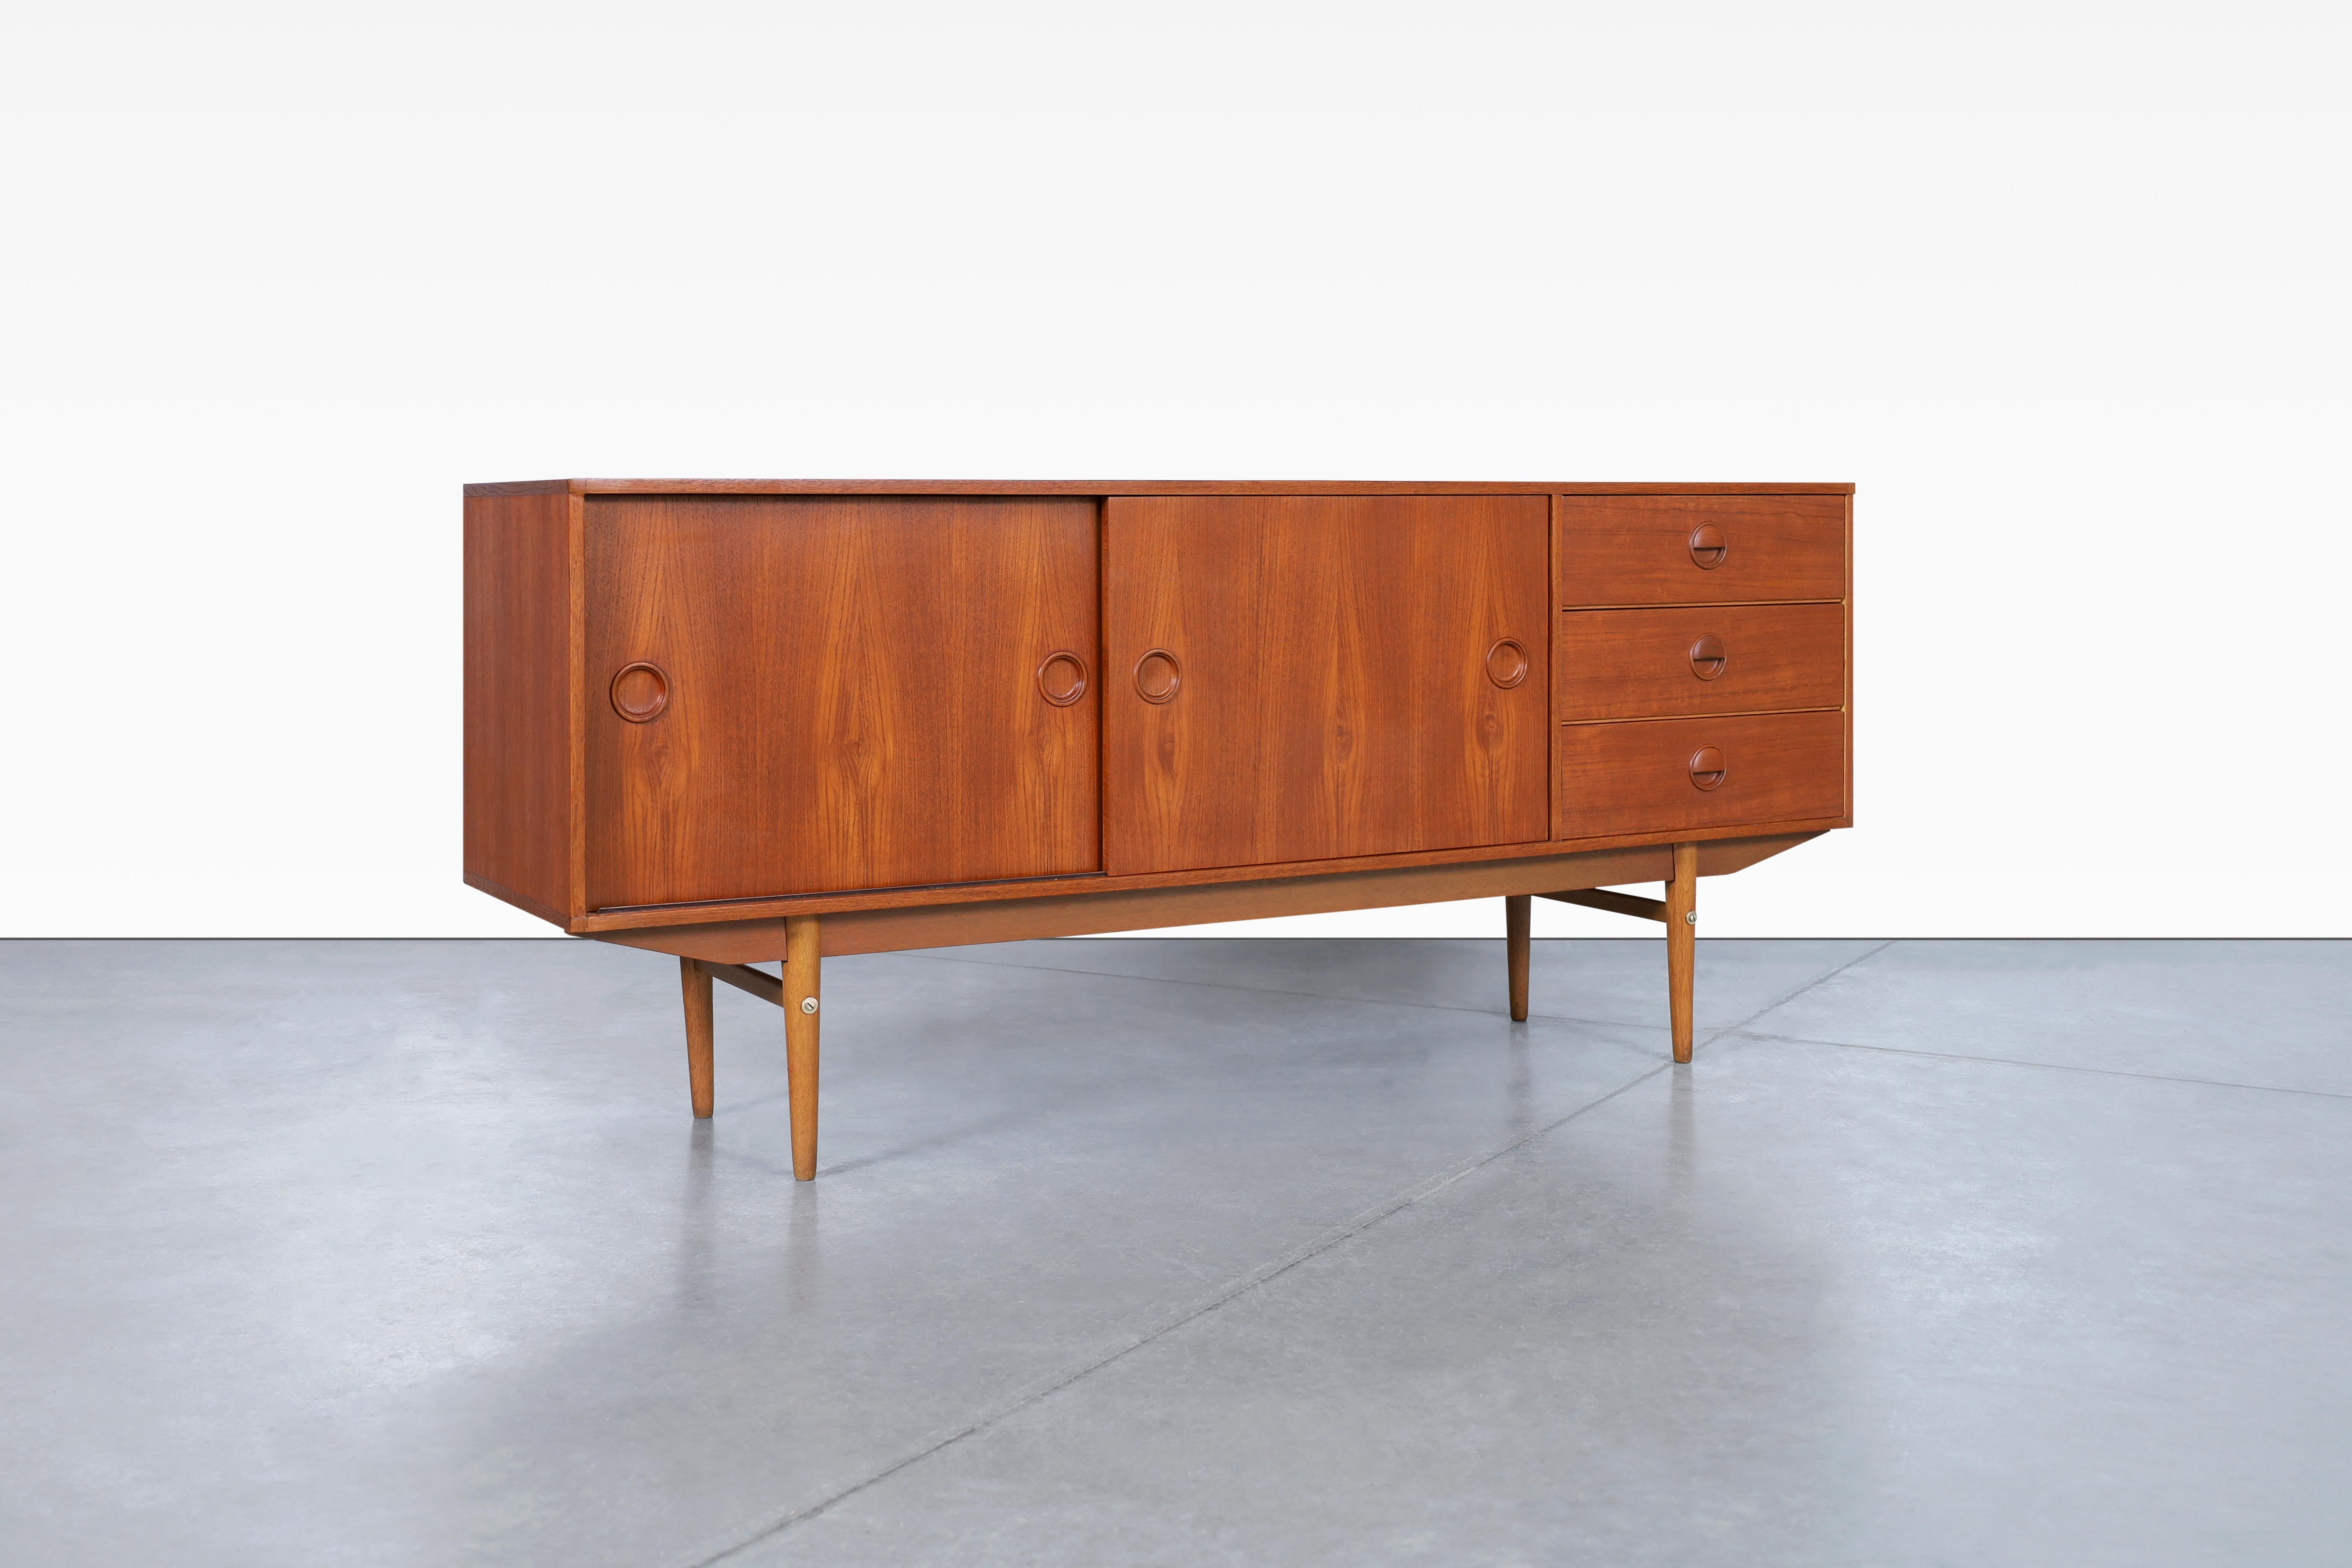 Fabulous mid-century teak sideboard by Marten Francken for Fristho in Netherland, circa 1960s. Crafted with meticulous attention to detail, this sideboard exemplifies the impeccable craftsmanship of the era. The handcrafted handles, shaped with